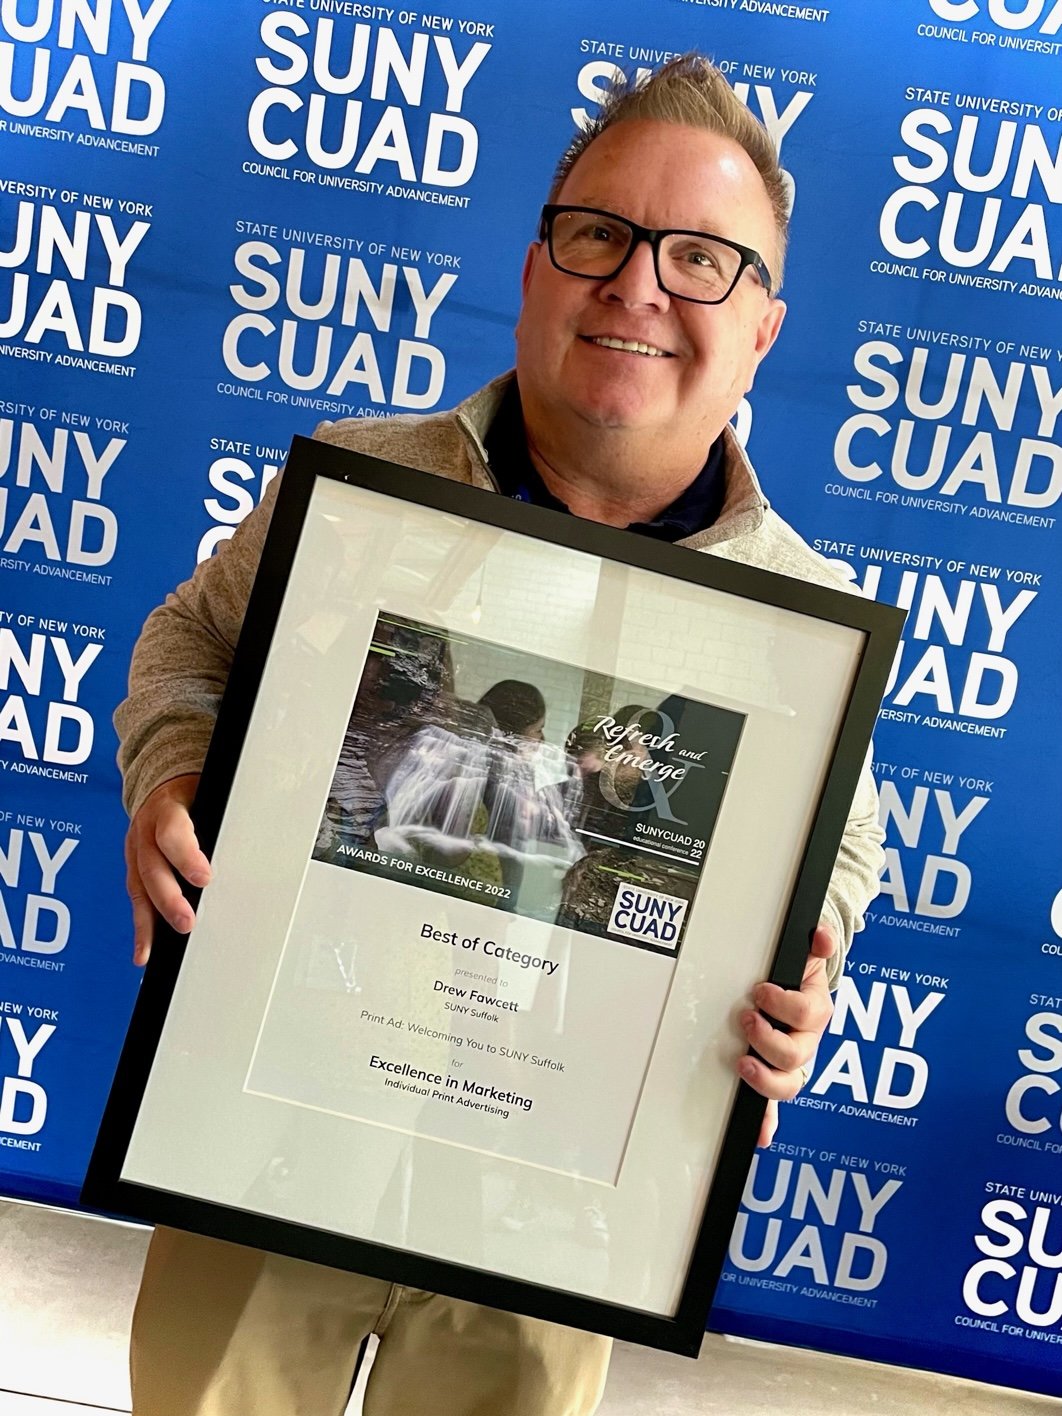 Photo of Drew Fawcett winning the SUNY CUAD Award for excellence in marketing.